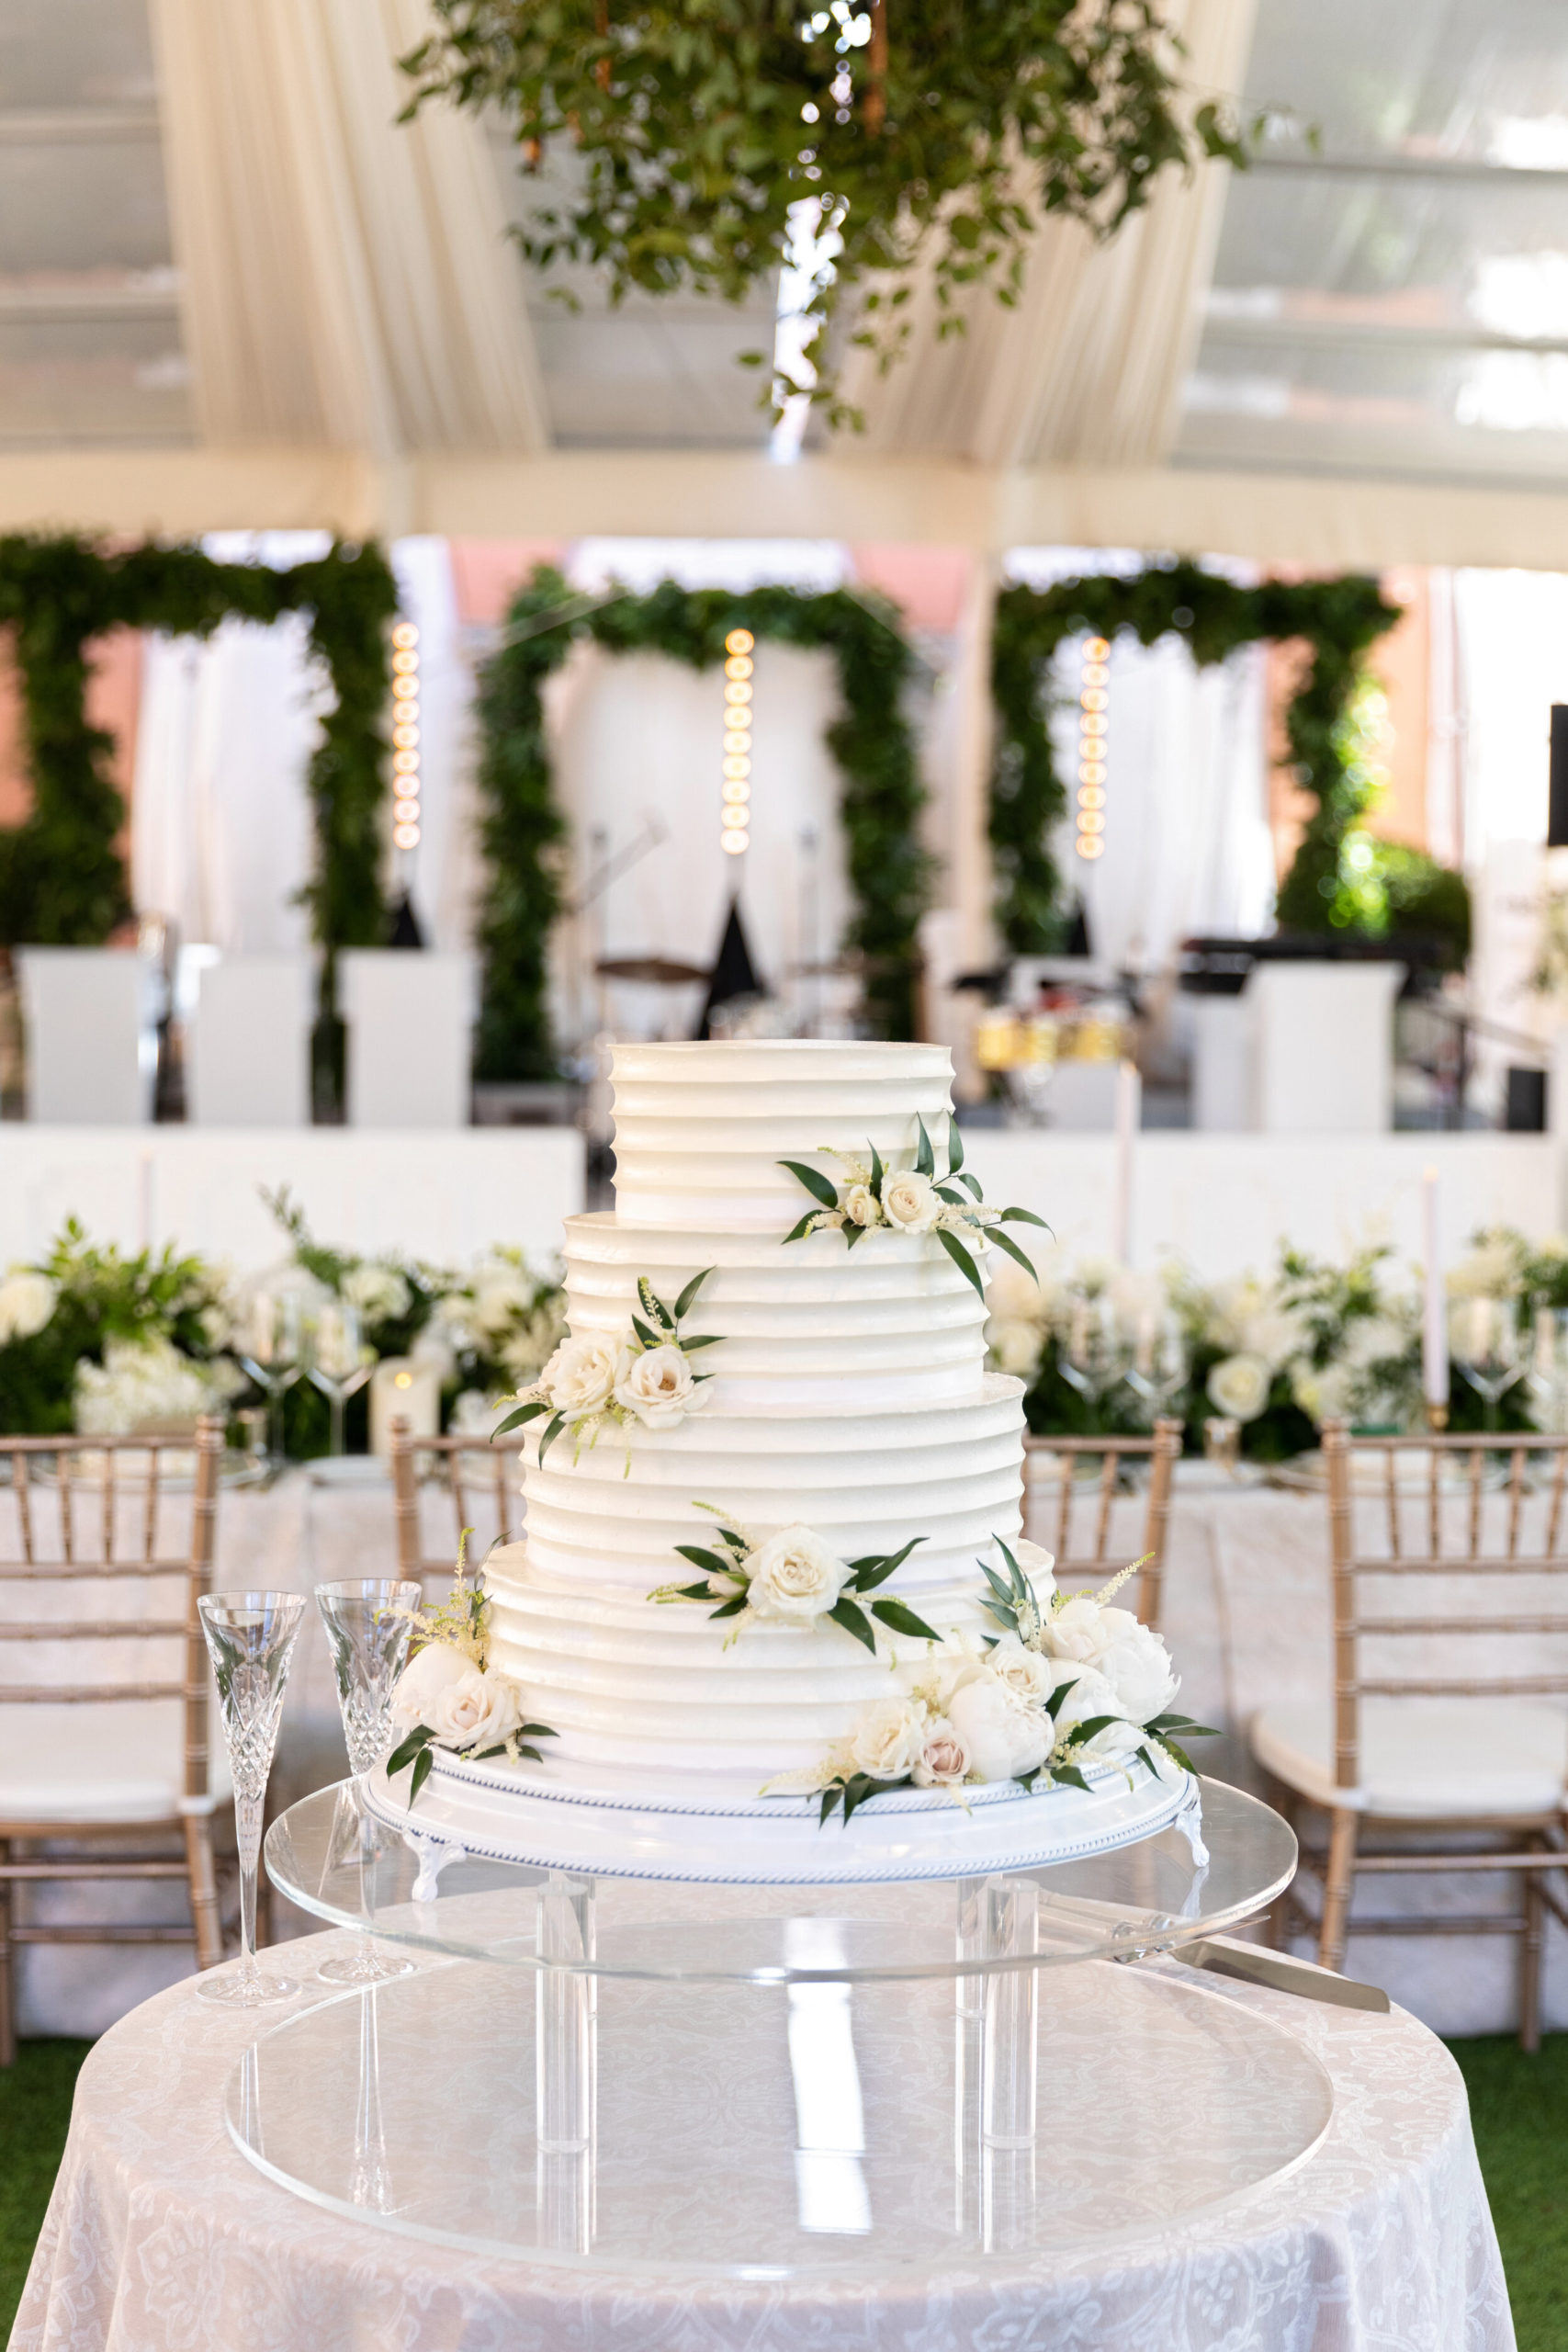 Cake Display with White Floral